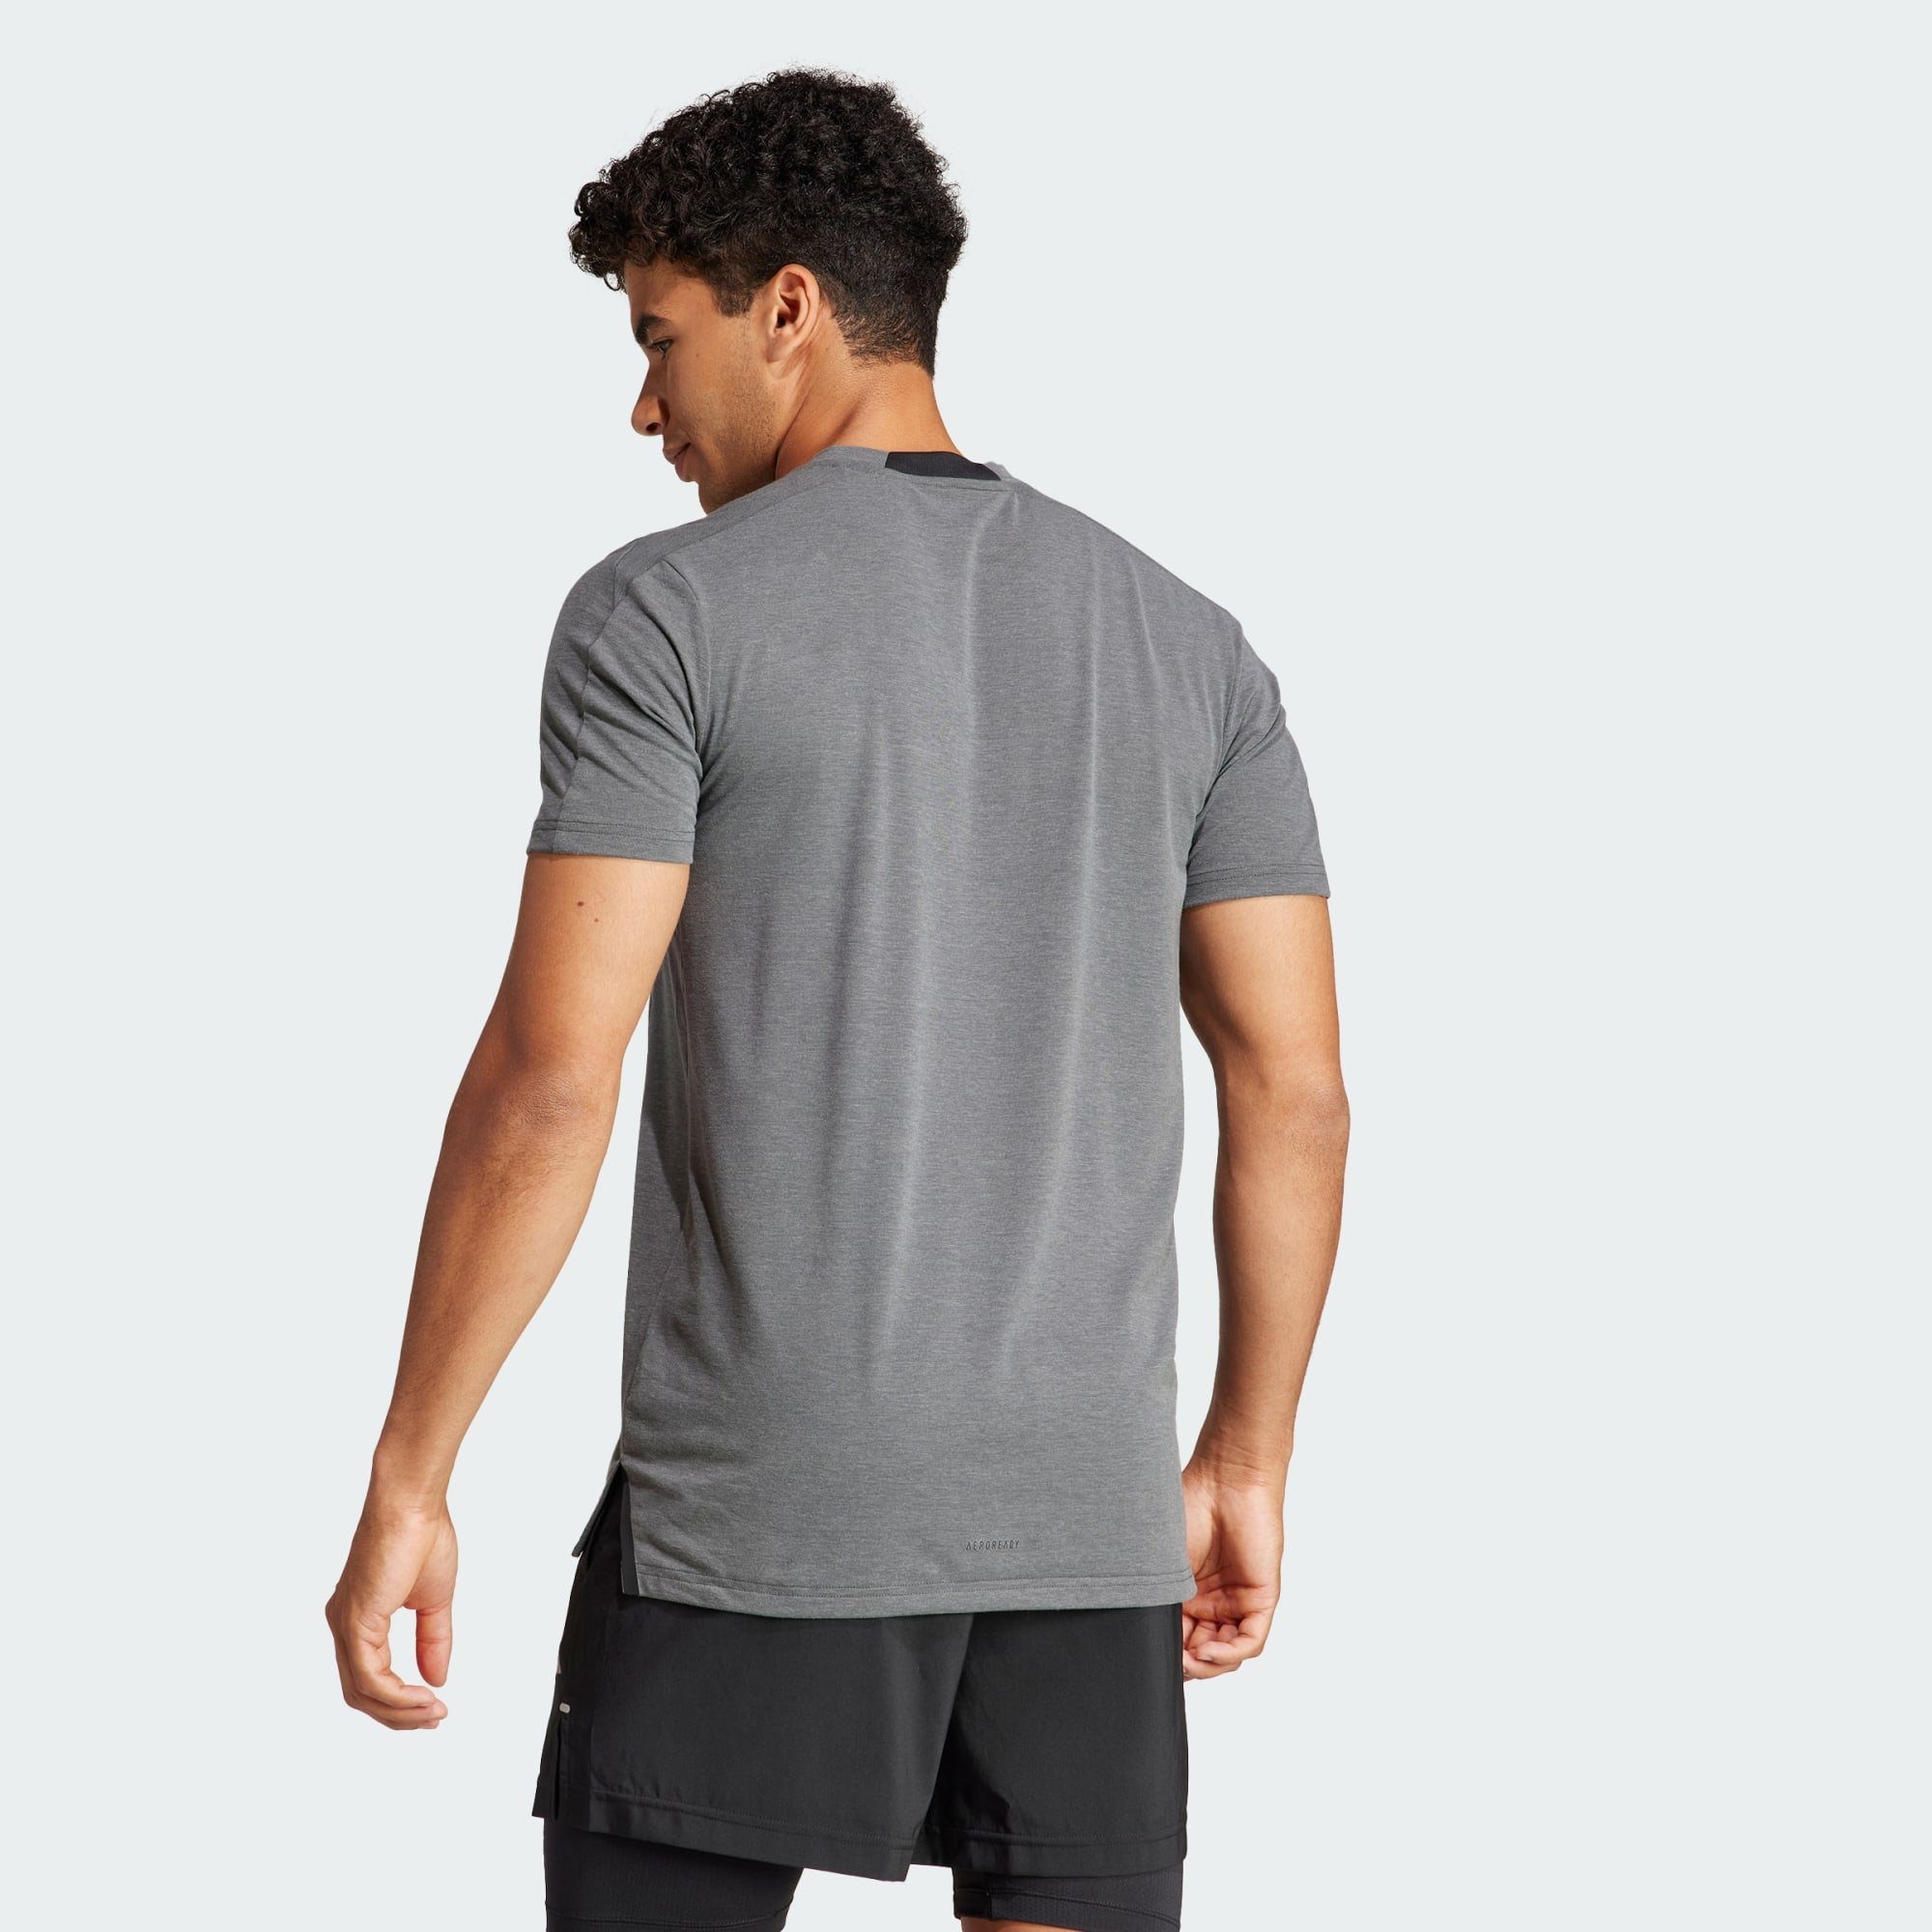 adidas Performance Funktionsshirt DESIGNED WORKOUT Solid FOR Dgh T-SHIRT TRAINING Grey